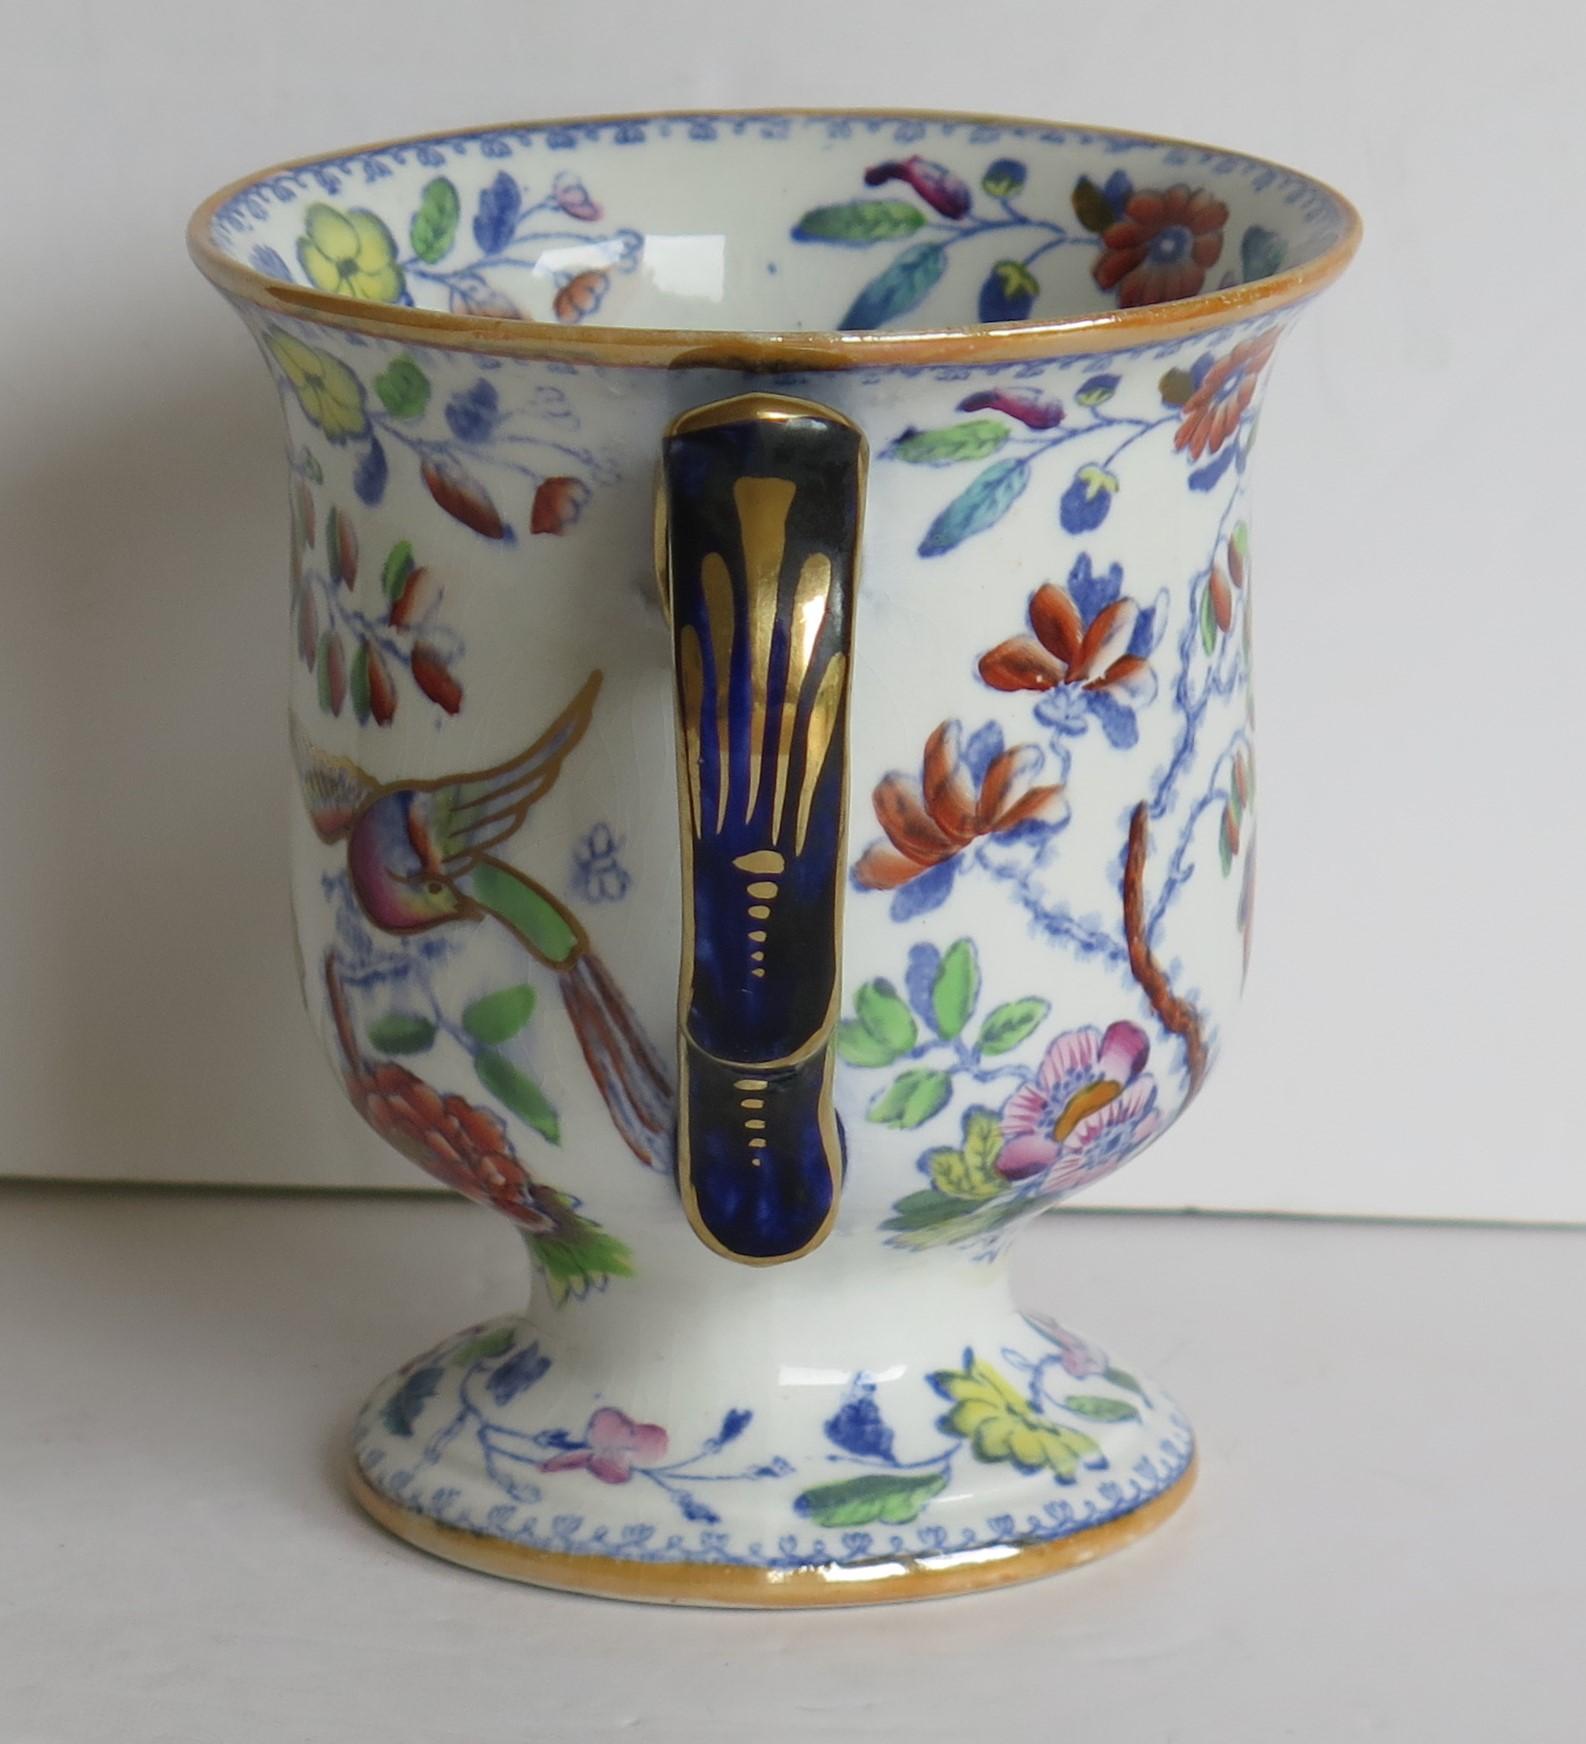 Hand-Painted Rare Mason's Ironstone Loving Cup or Small Vase Flying Bird Pattern, Circa 1860